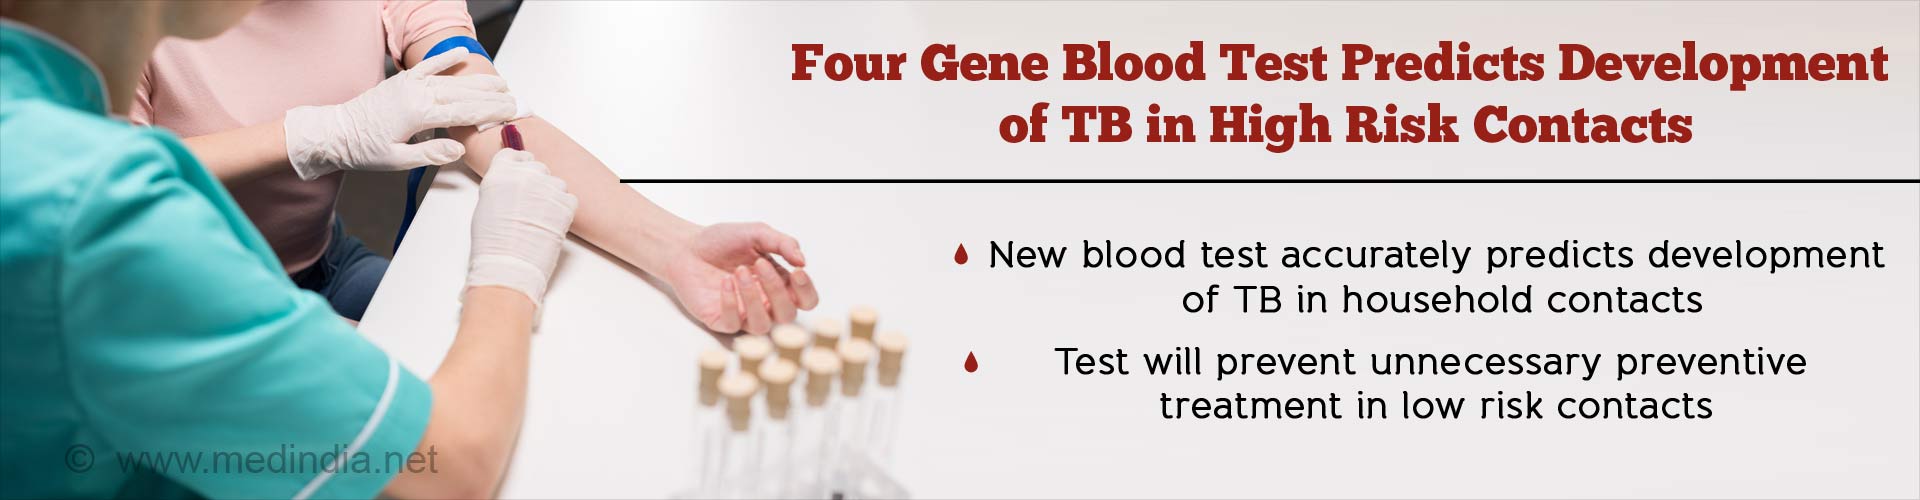 four gene blood test predicts development of TB in high risk contacts
- new blood test accurately predicts development of TB in household contacts
- test will prevent giving unnecessary preventive treatment in low risk contacts